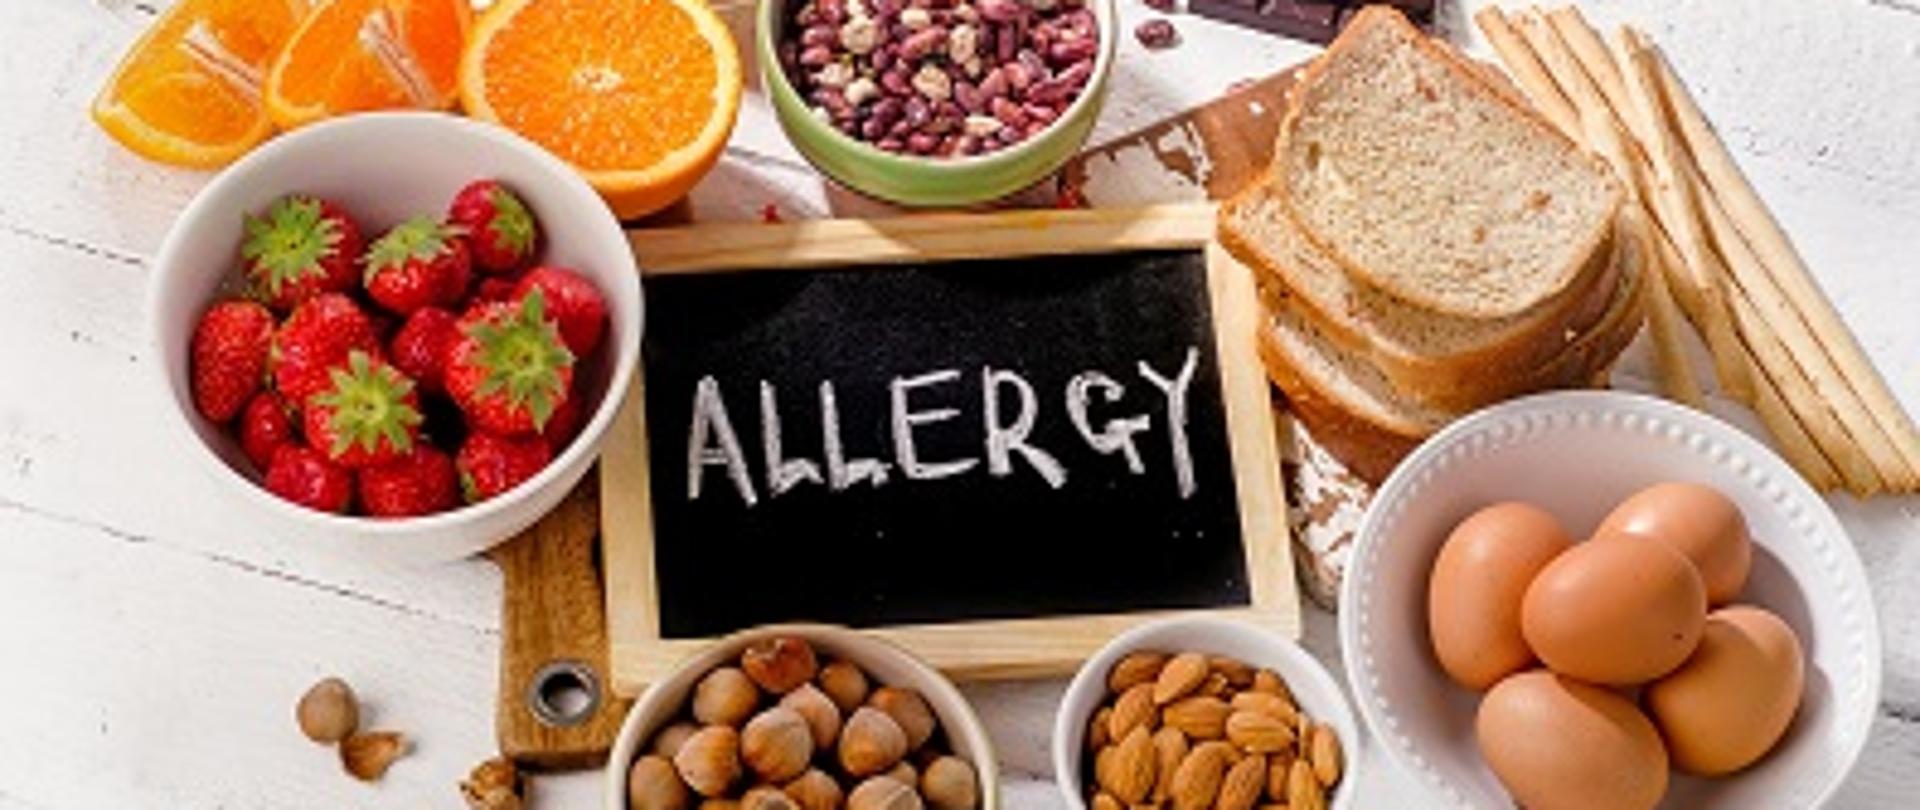 Food allergy. Allergic food on wooden background. View from above